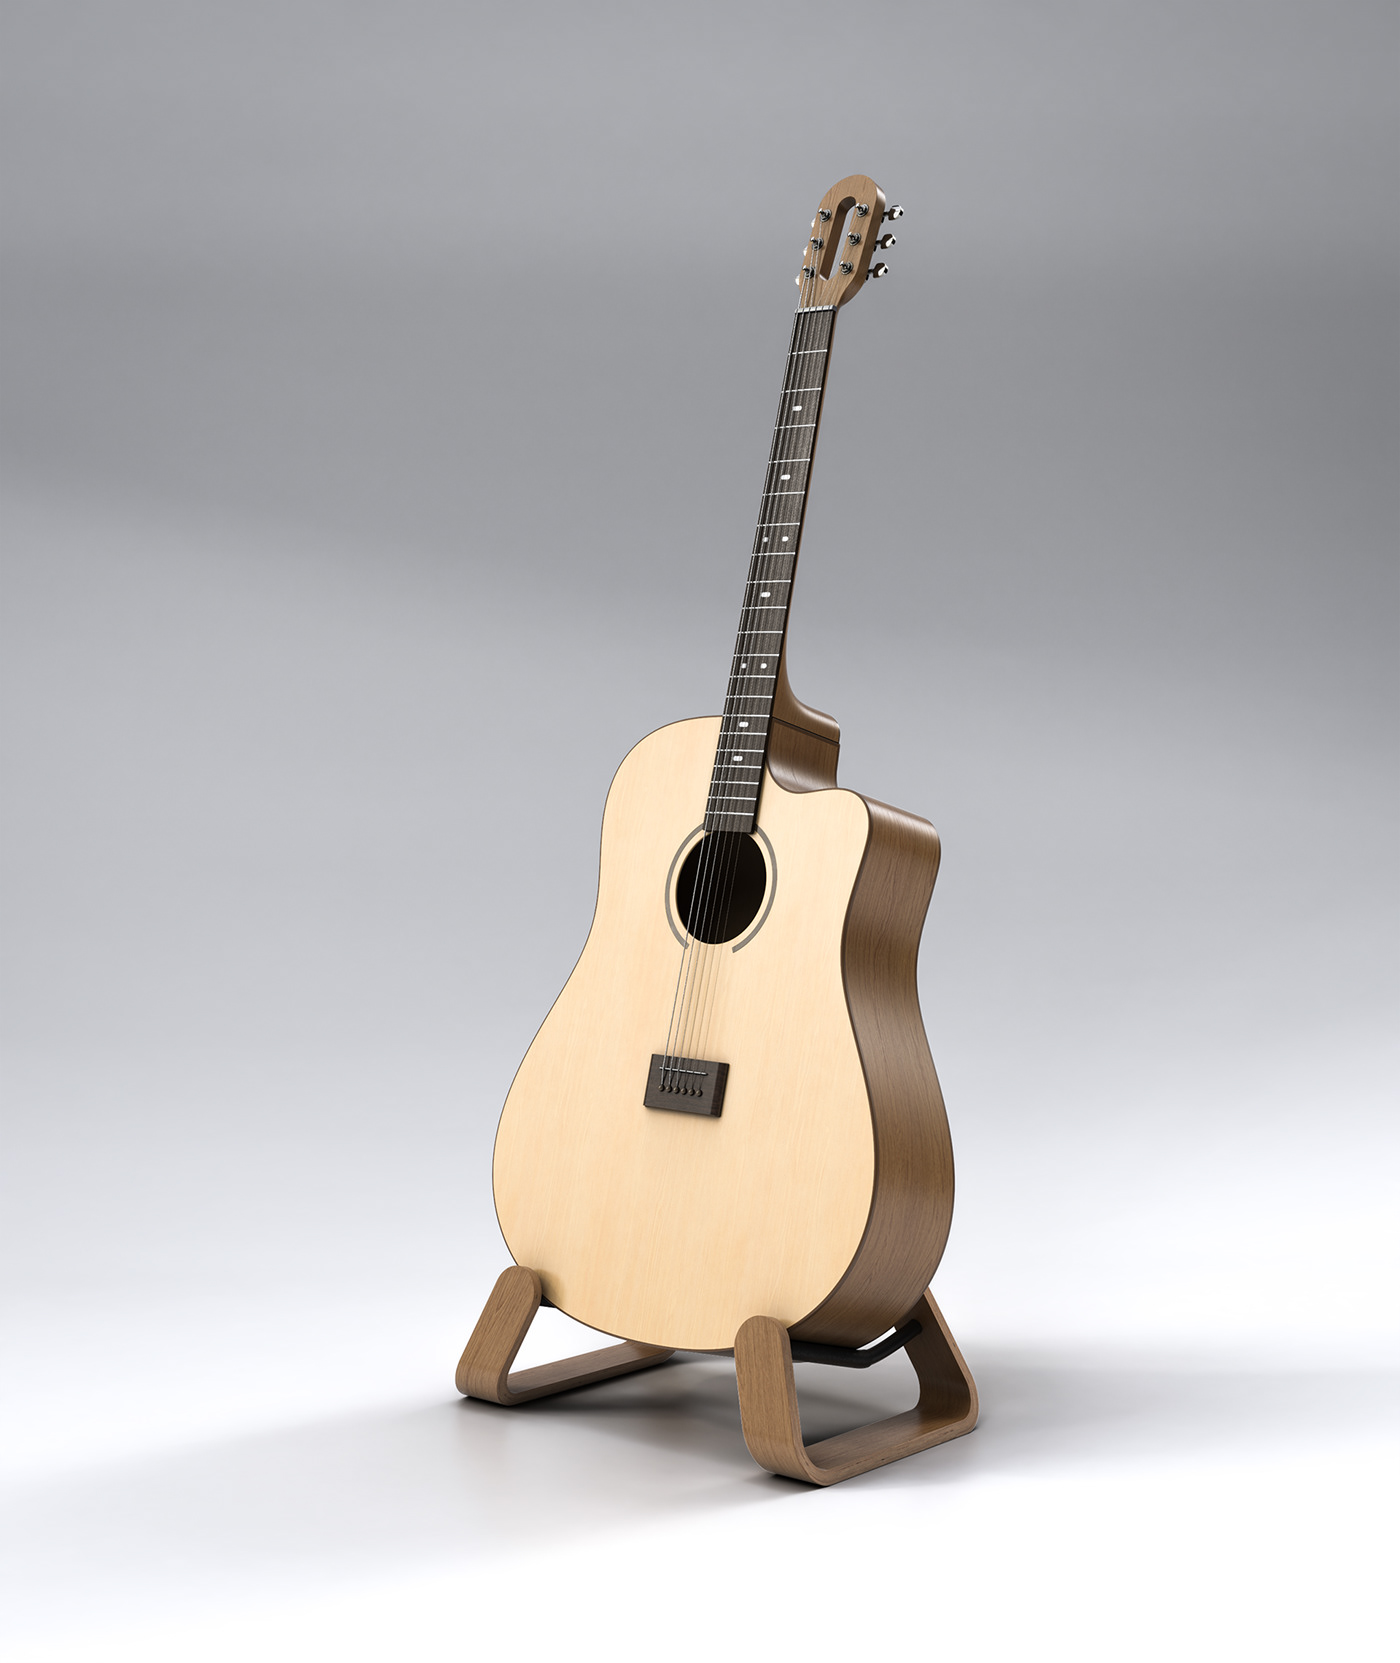 concept design guitar instrument CGI product rendering visualization cmf wood